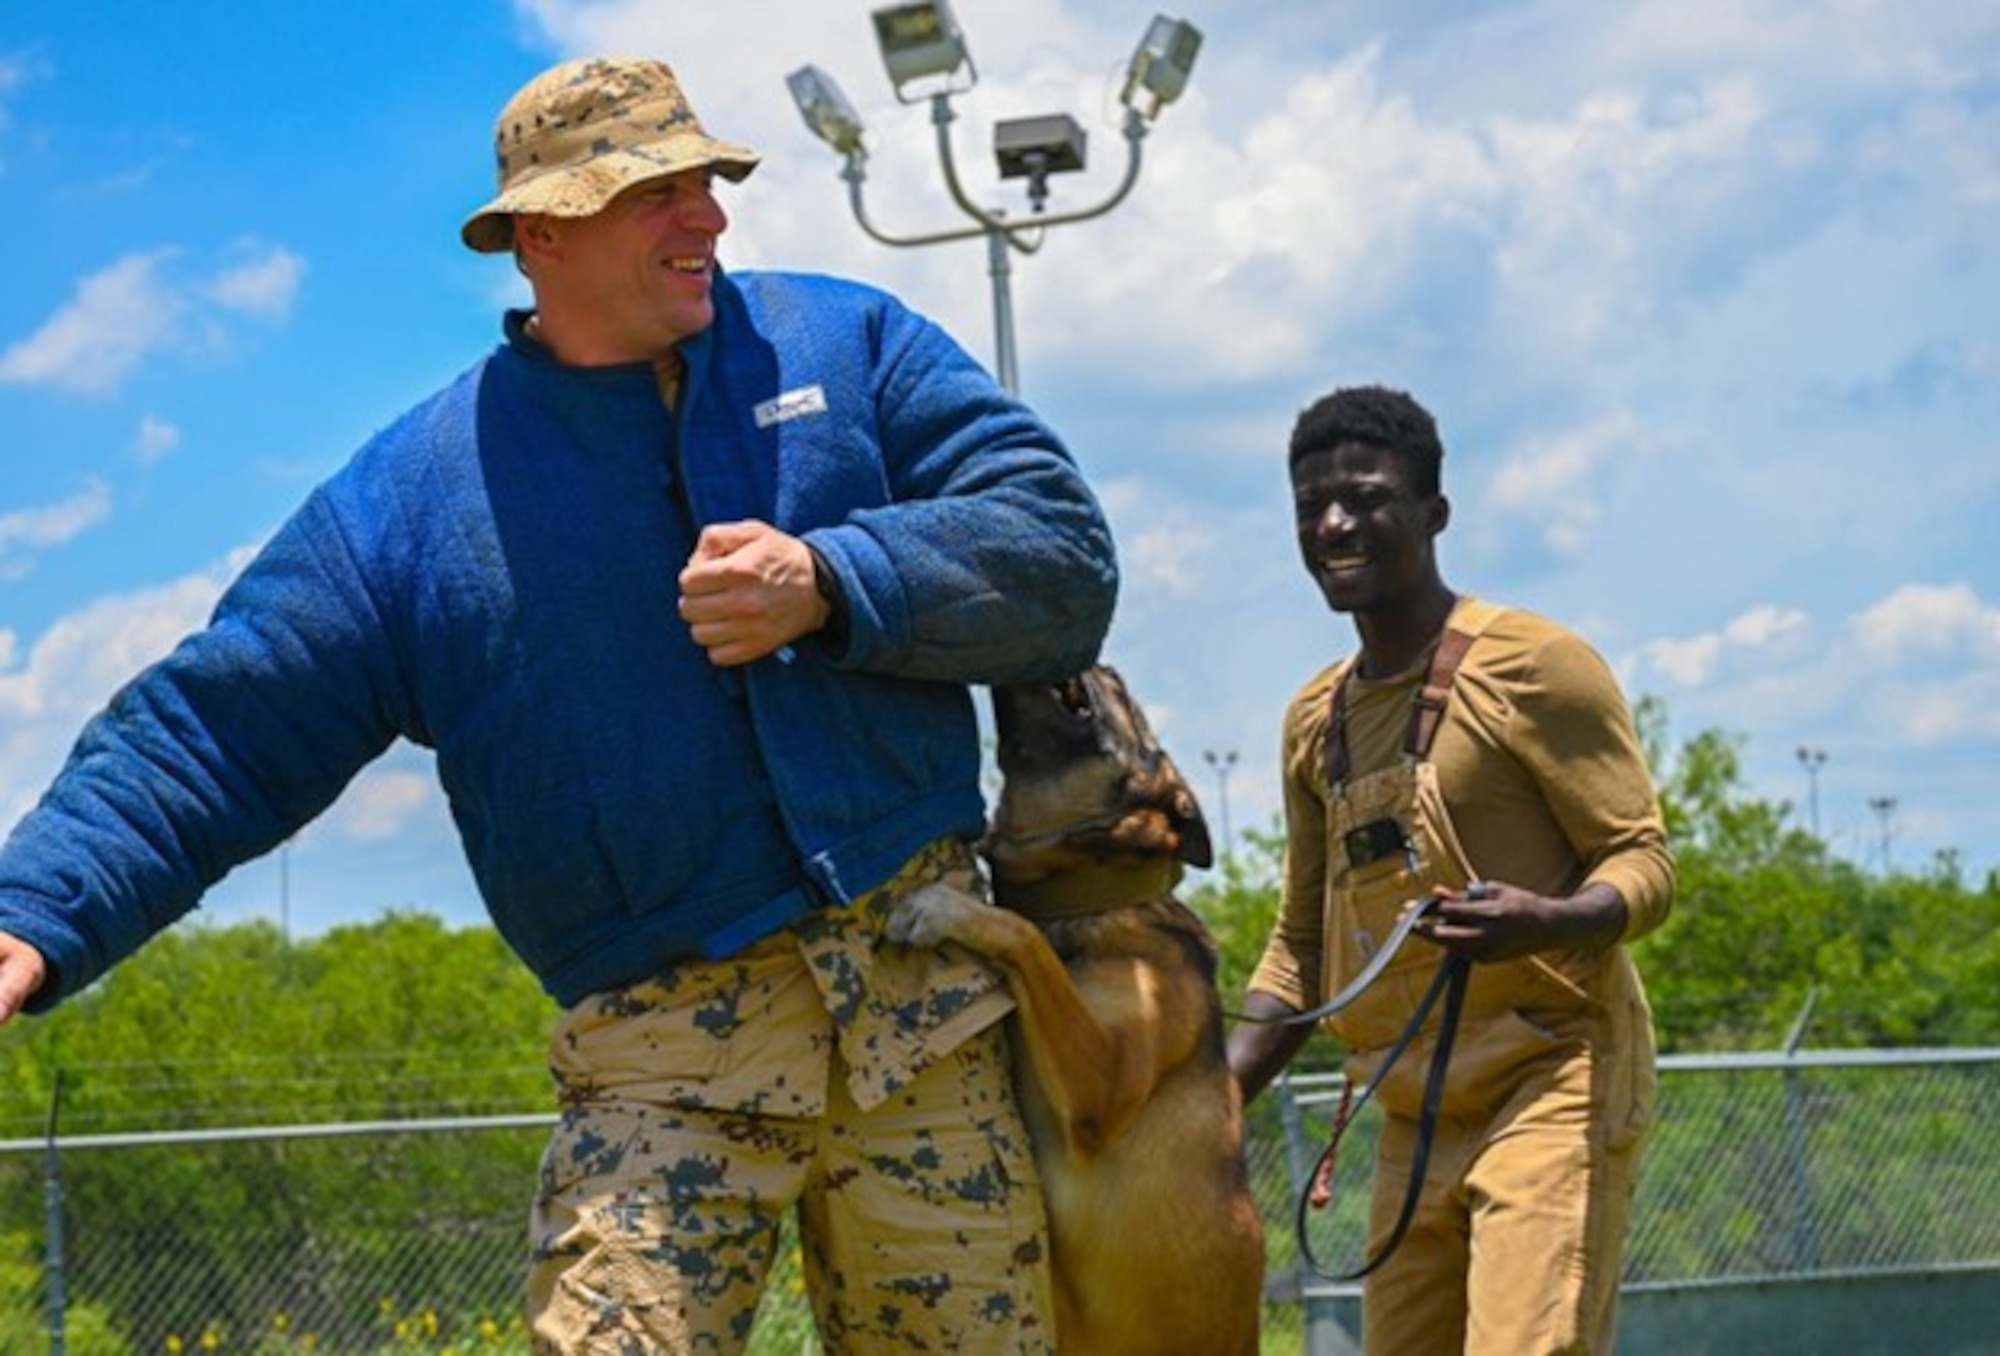 1st Lt. Martti Eerma, a Estonian Defense Force reservist, is attacked while wearing padded protective clothing by a military working dog as part of a training demonstration guided by Staff Sgt. Wilson Brantley, 802nd Security Forces Squadron, a military working dog trainer, at Joint Base San Antonio-Medina Annex, Texas, June 8, 2023. Eerma visited the installation as part of the Military Exchange program coordinated with NATO militaries to help develop cultural understanding, regional expertise, language proficiency, and interoperability. (U.S. Air Force photo by Senior Airman Mark Colmenares)